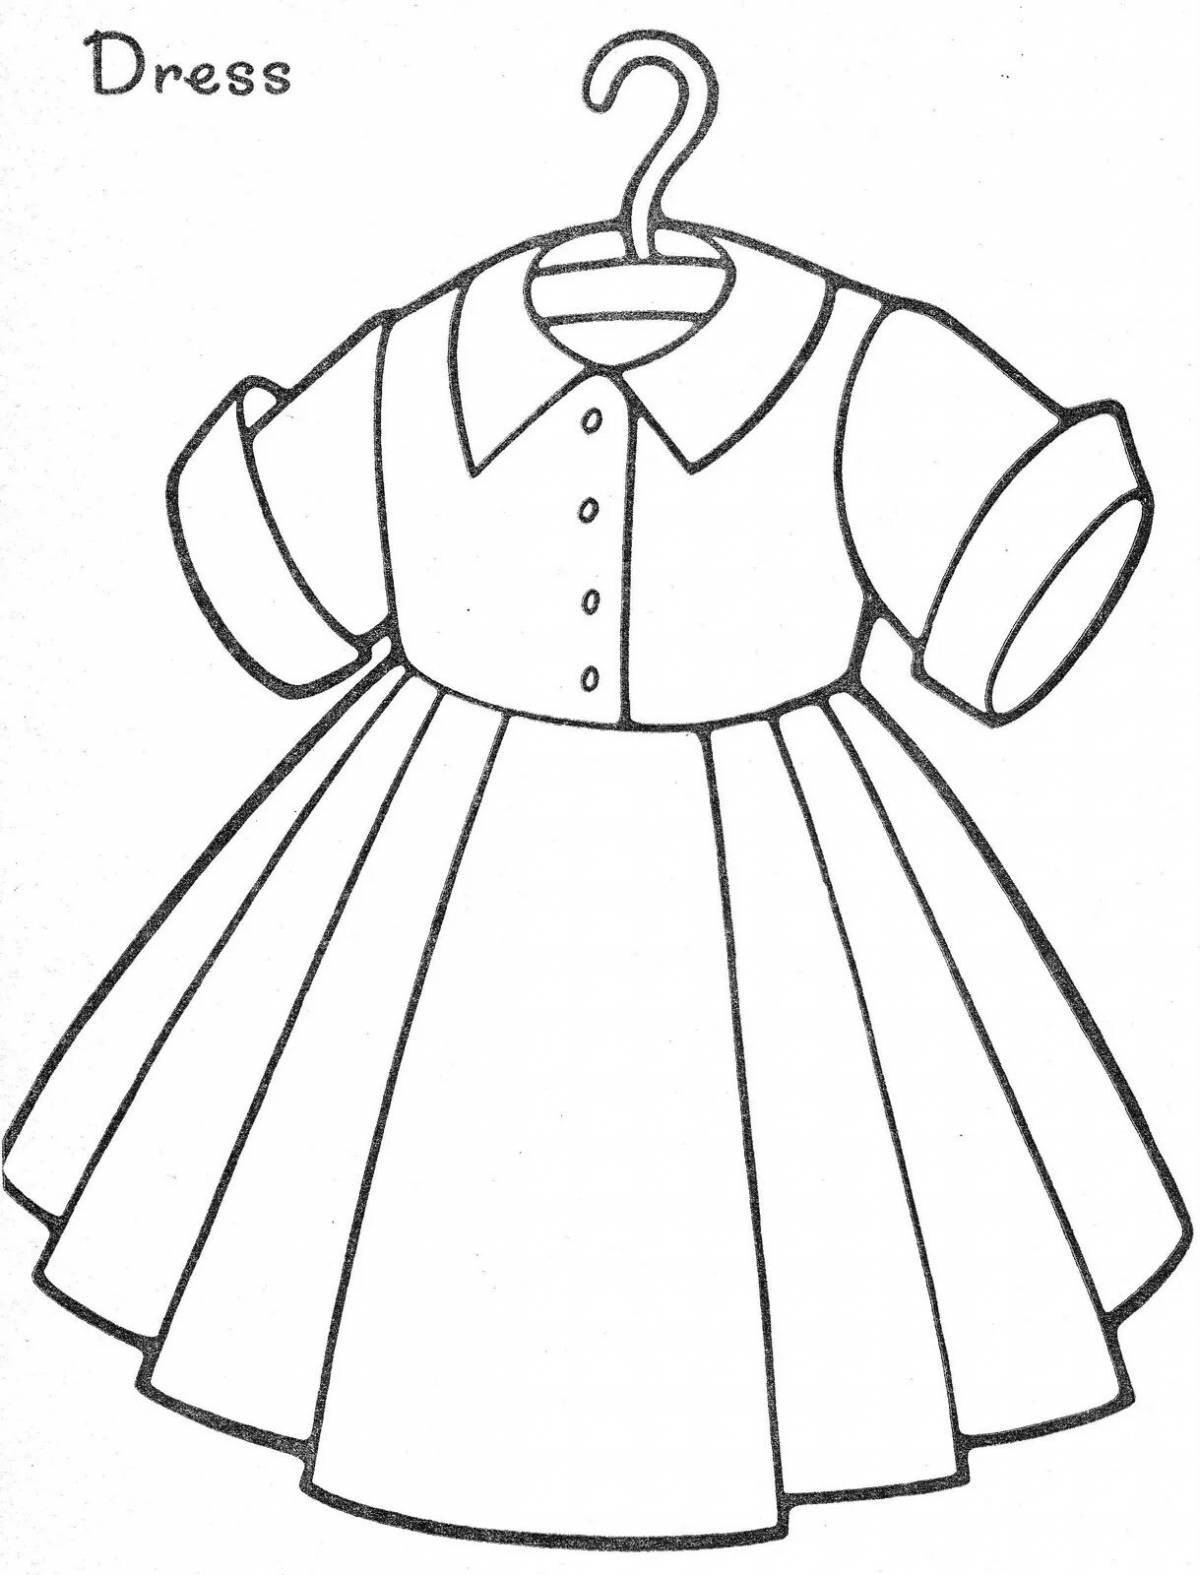 Fashionable dress for mother 2 junior group